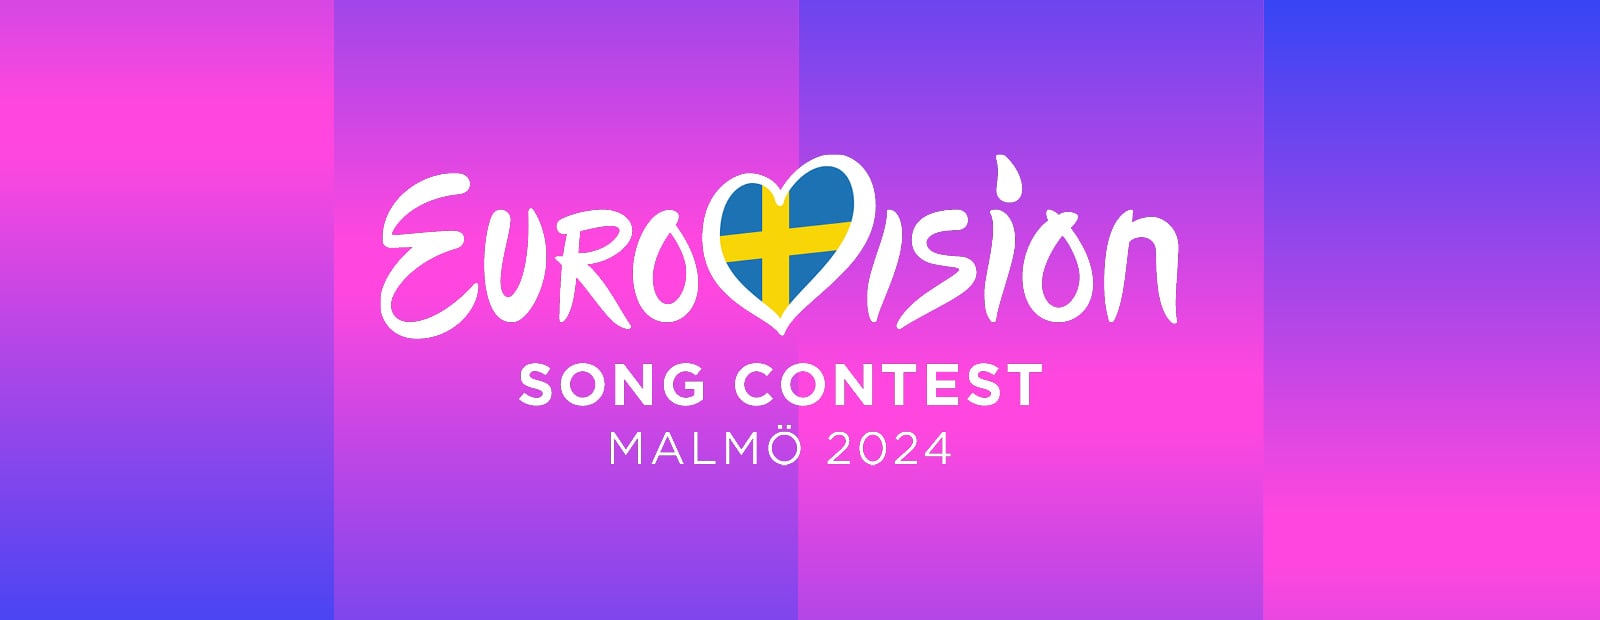 Eurovision Song Contest 2024 Semifinal 2 - Live Show